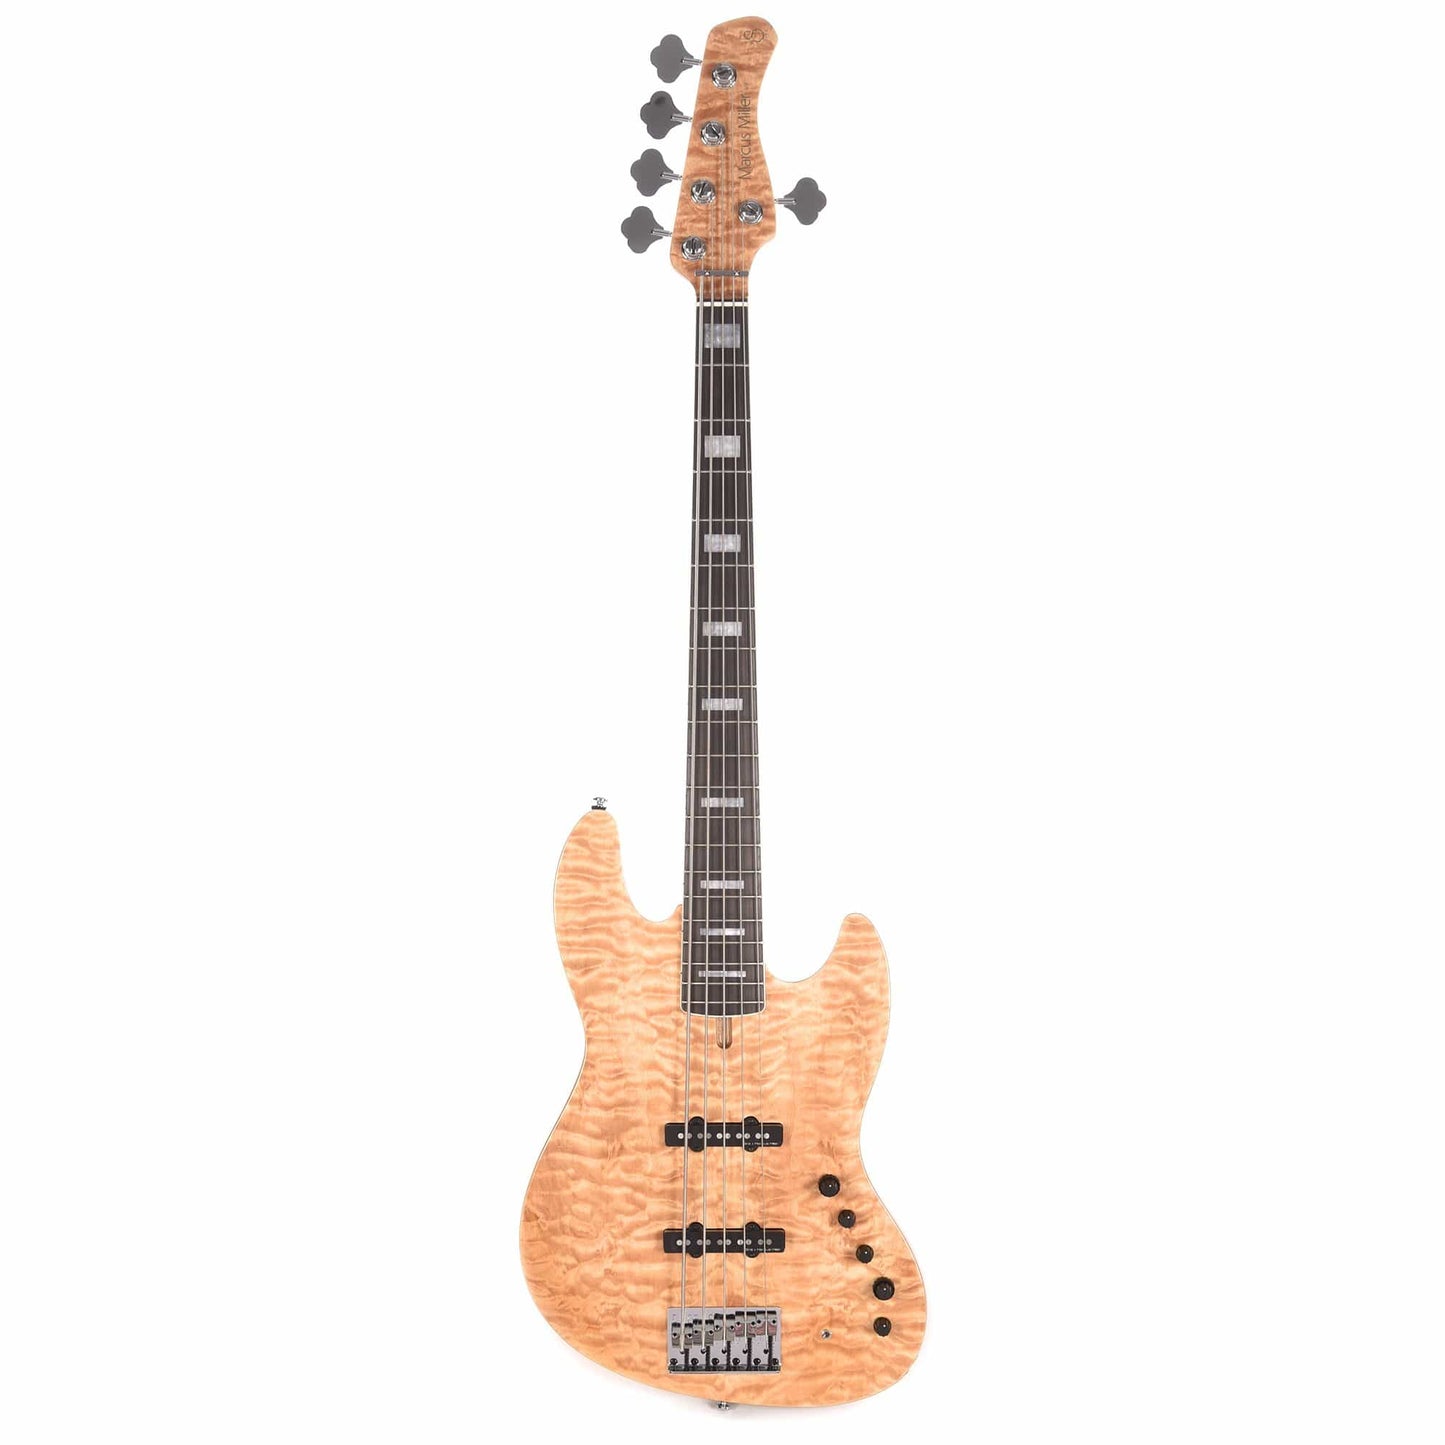 Sire Marcus Miller V9 Swamp Ash/Quilted Maple 5-String Natural (2nd Gen) Bass Guitars / 5-String or More